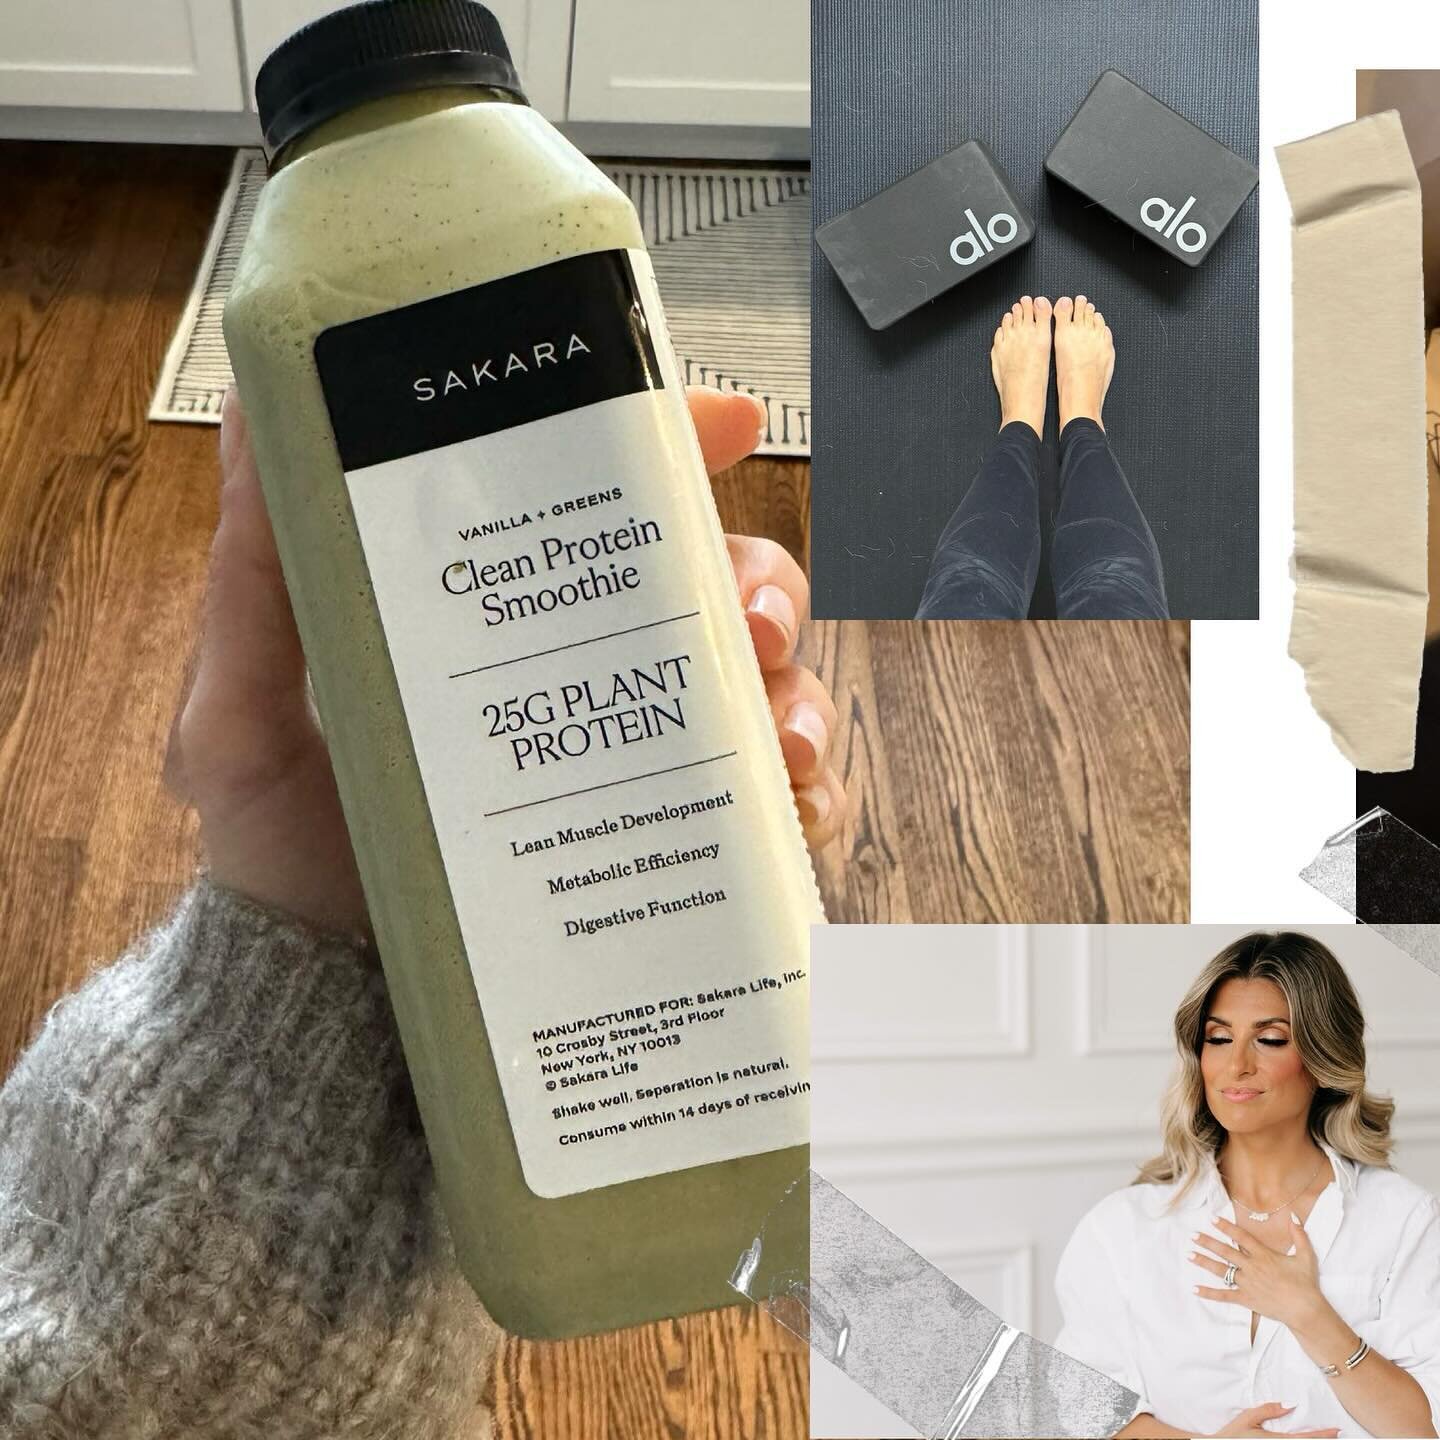 My @sakaralife January Reset mood board ☁️✨🤍

It&rsquo;s always natural when the new year strikes to reset and renew. And what I love most about @sakaralife is that whether you&rsquo;re reaching for the wellness staples in your pantry or the meal de